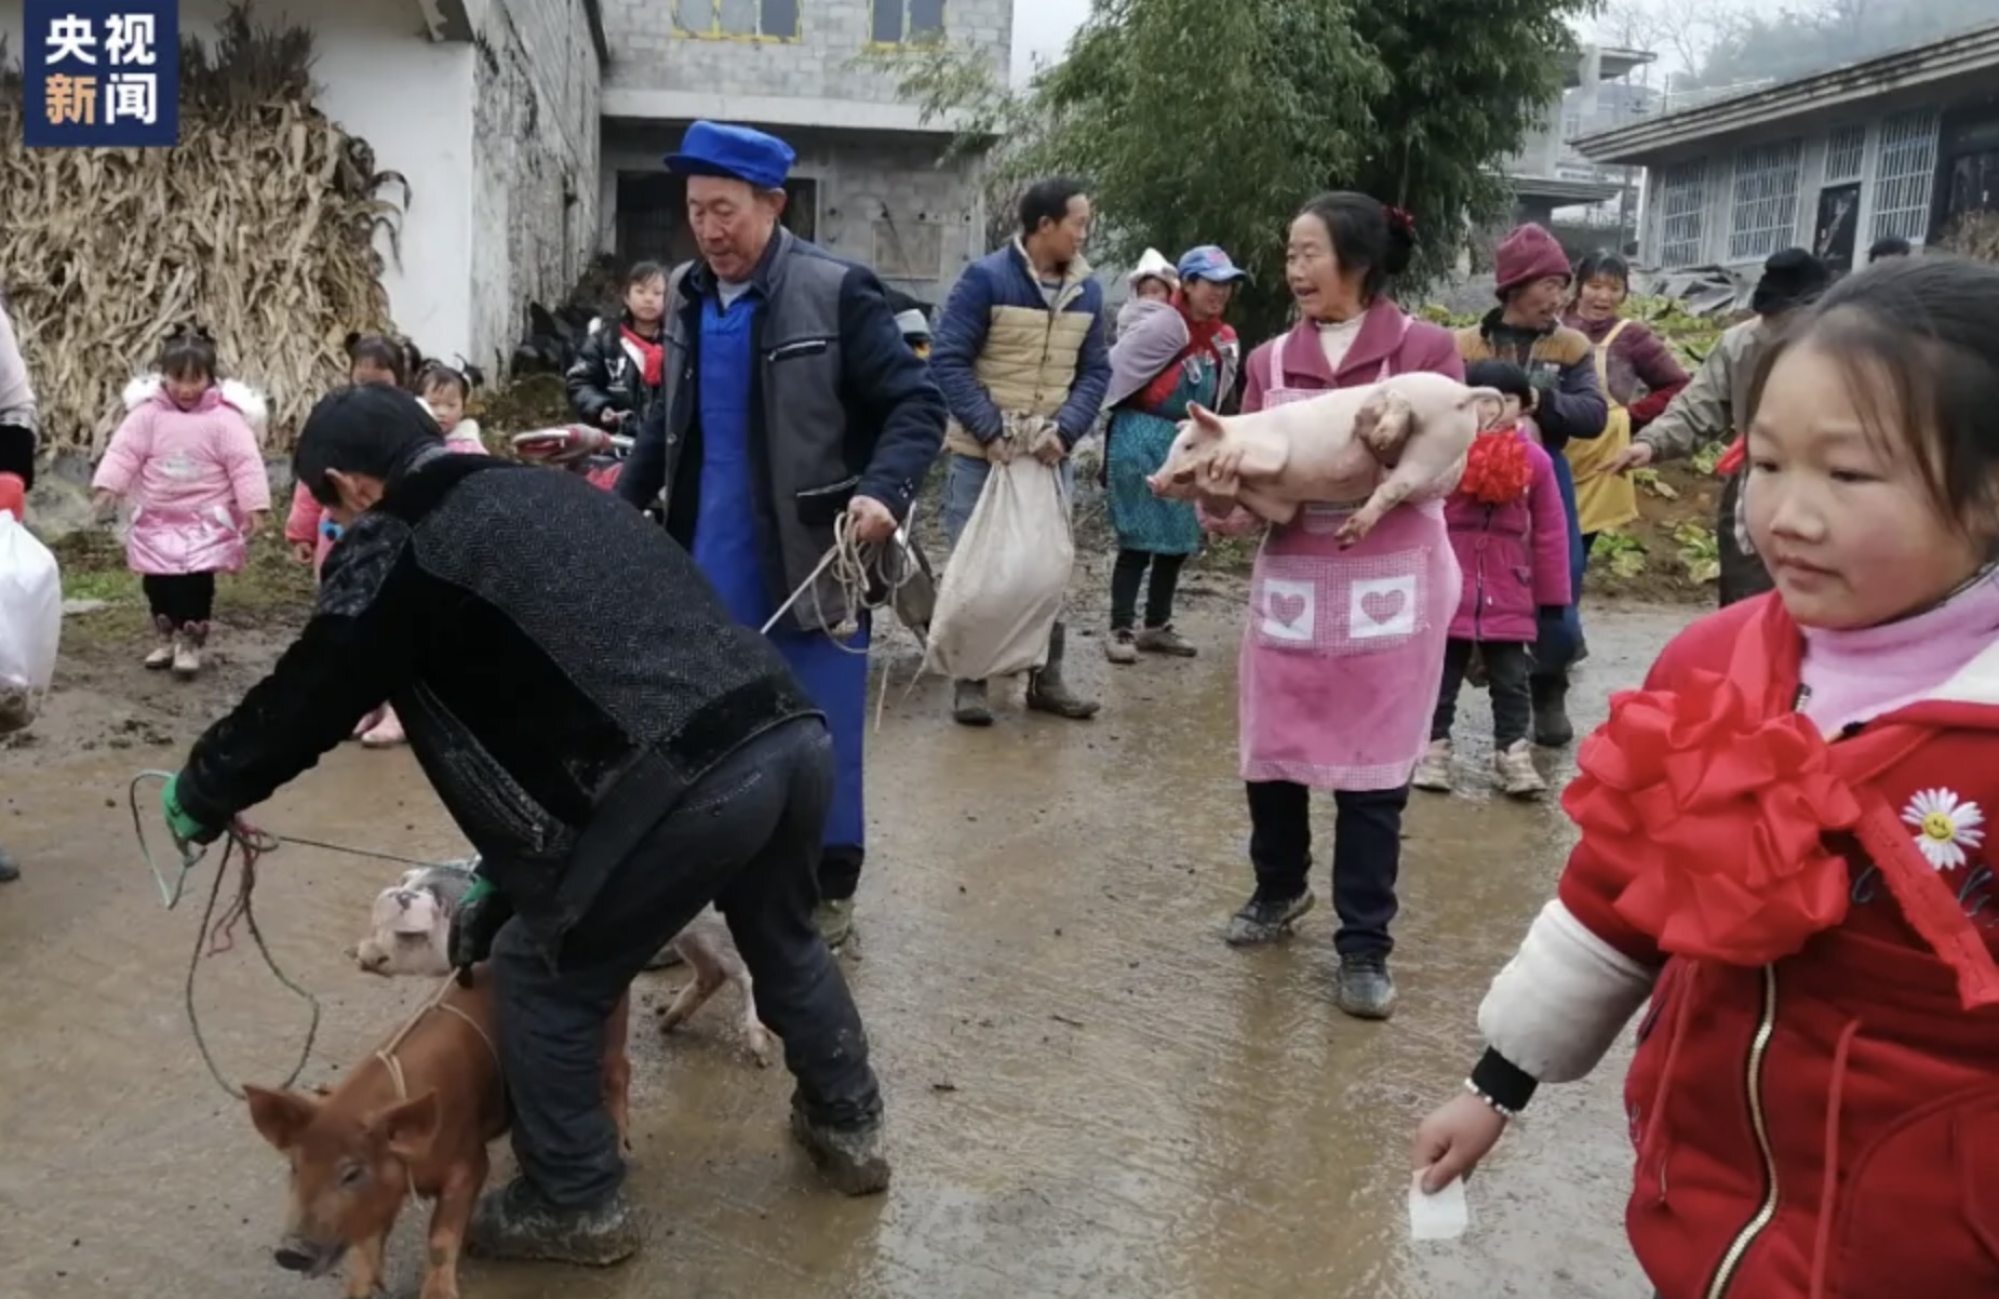 The piglets were taken home on leads and in people’s arms on the day of being given out. Photo: Weixin